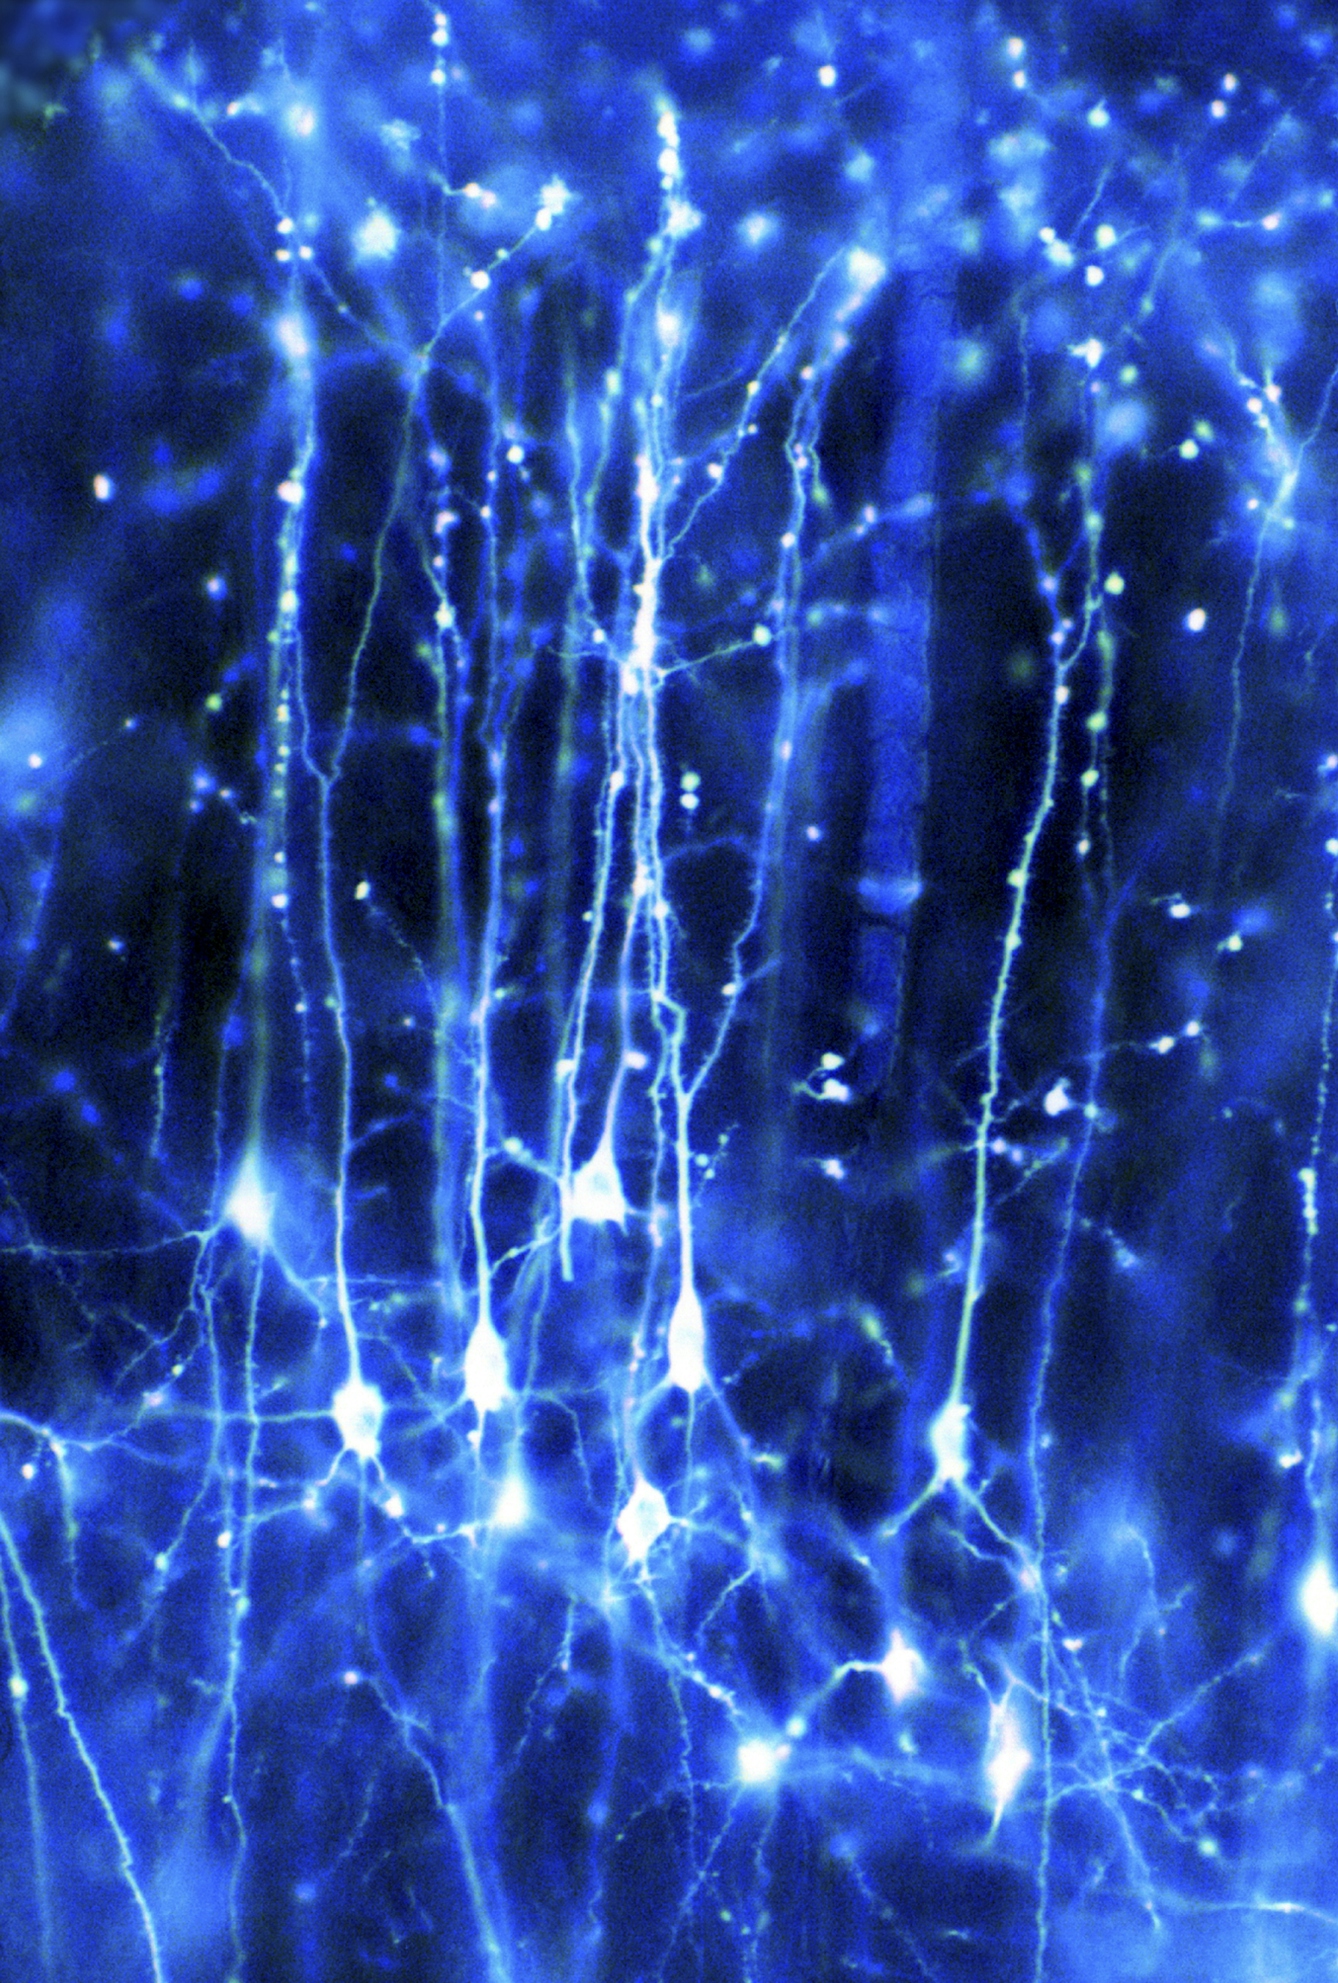 Pyramidal neurons forming a network in the brain. 